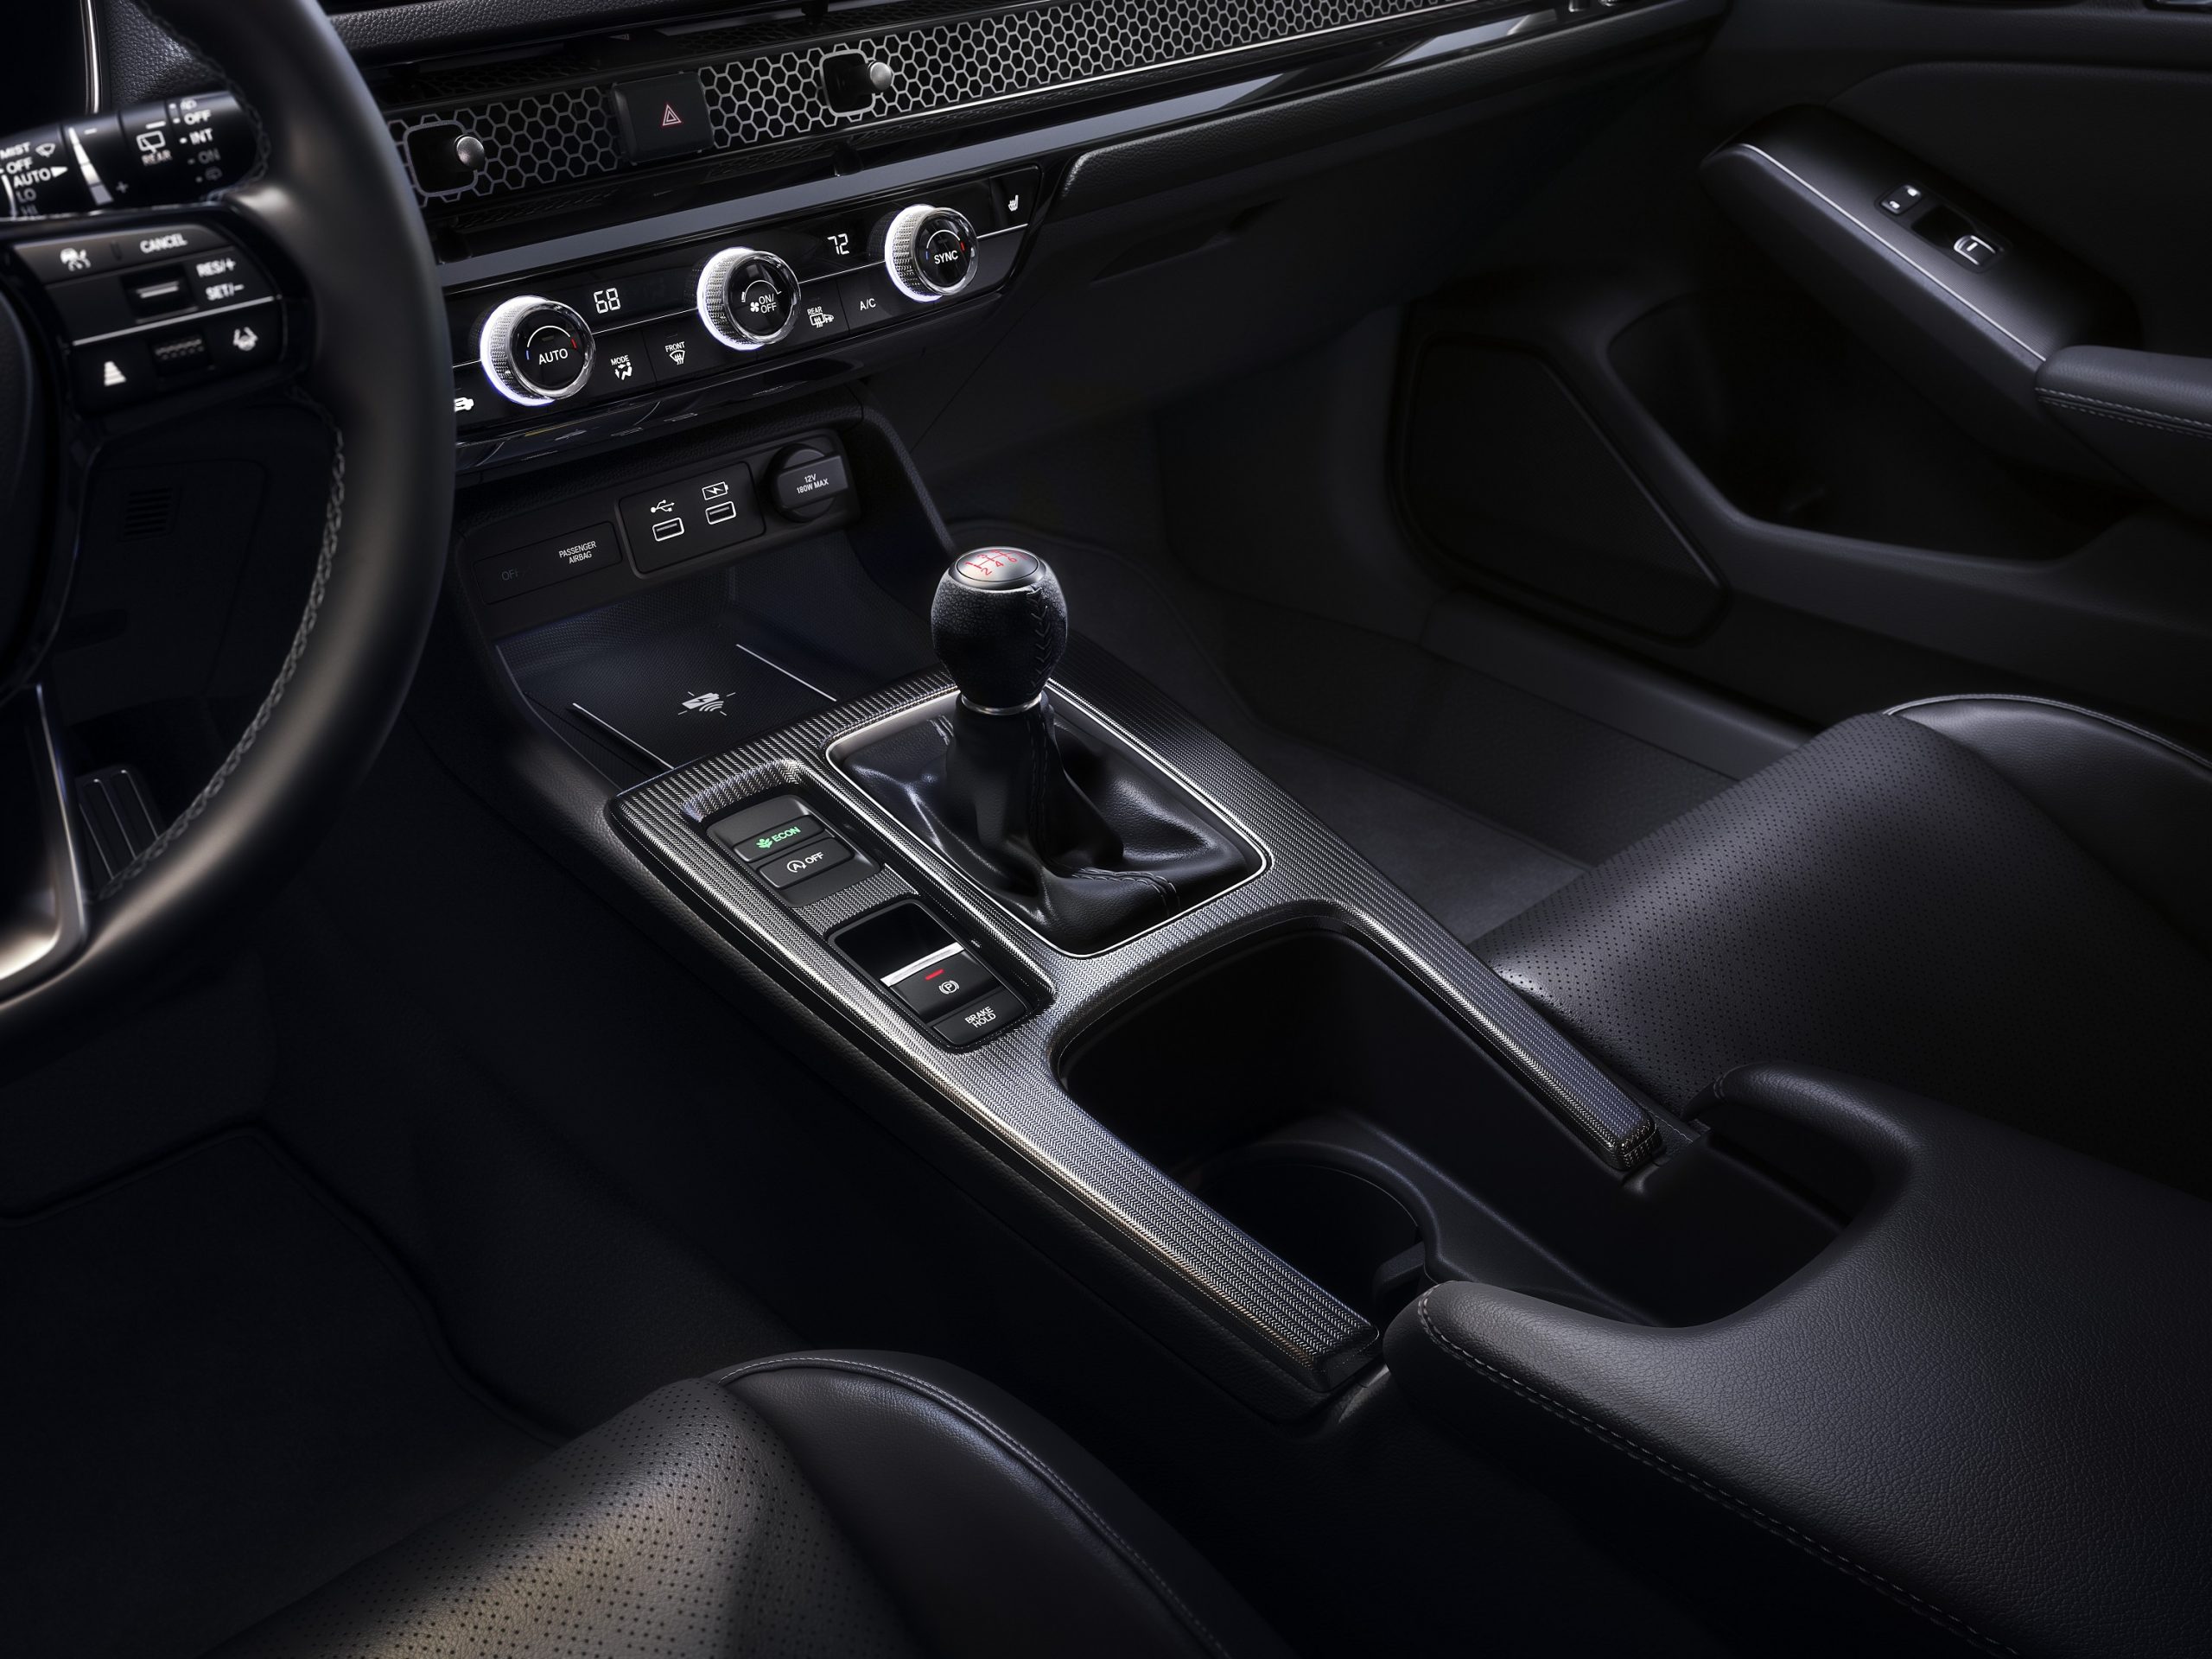 The manual transmission found in the 2022 Civic hatchback